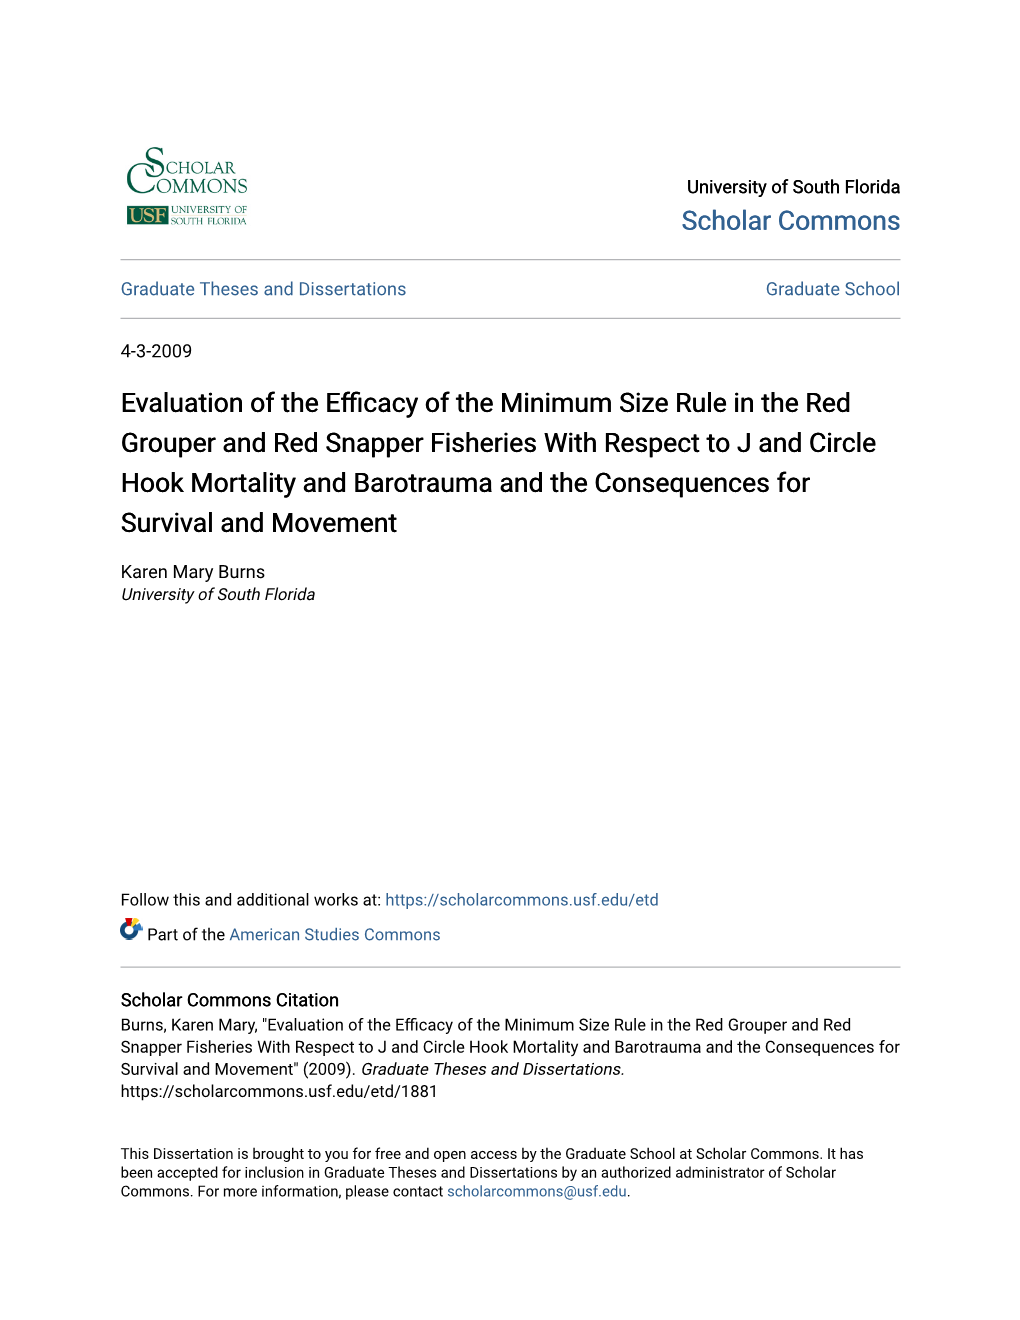 Evaluation of the Efficacy of the Minimum Size Rule in the Red